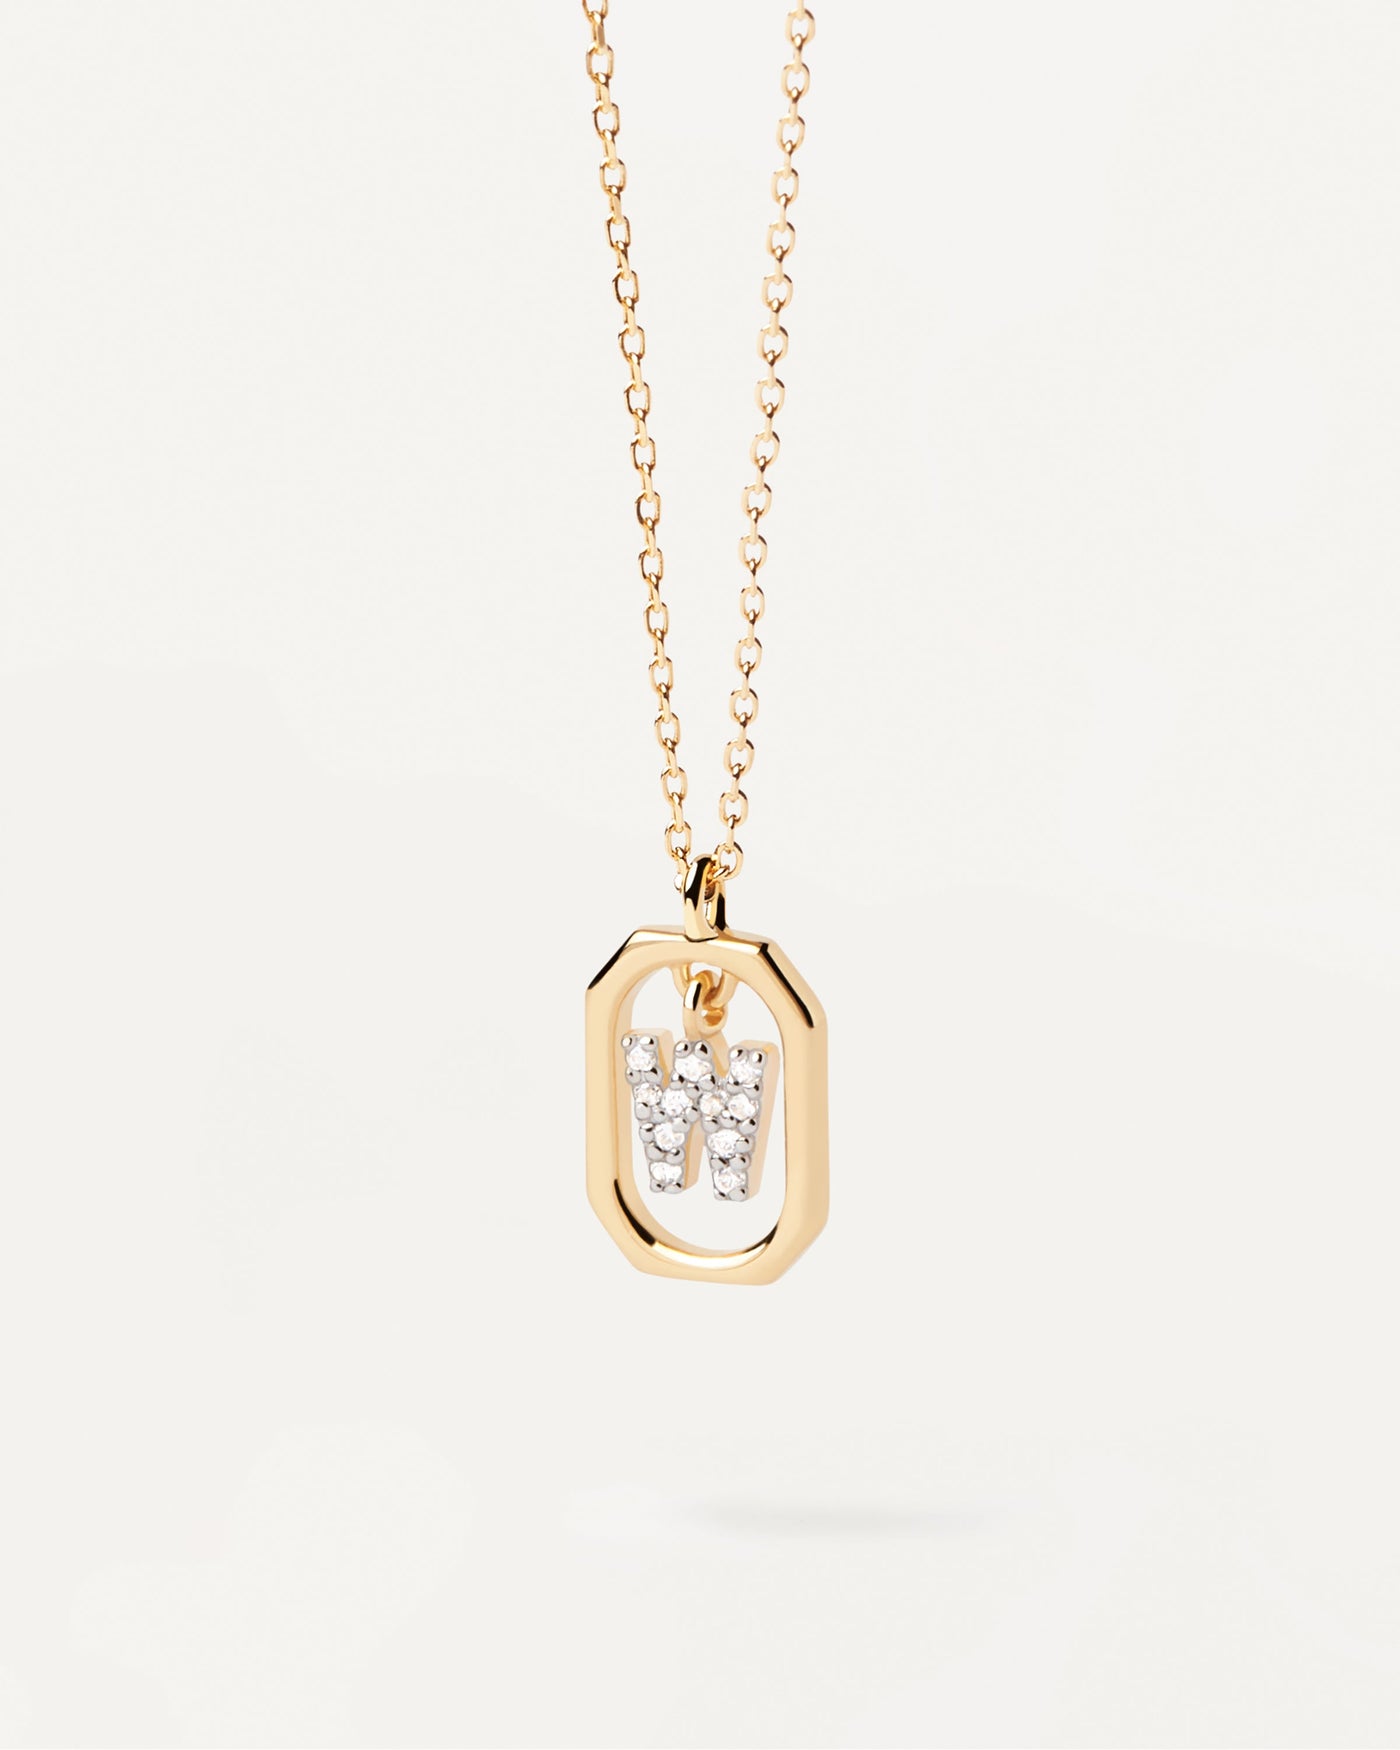 2023 Selection | Mini Letter W Necklace. Small initial W necklace in zirconia inside gold-plated silver octagonal pendant. Get the latest arrival from PDPAOLA. Place your order safely and get this Best Seller. Free Shipping.